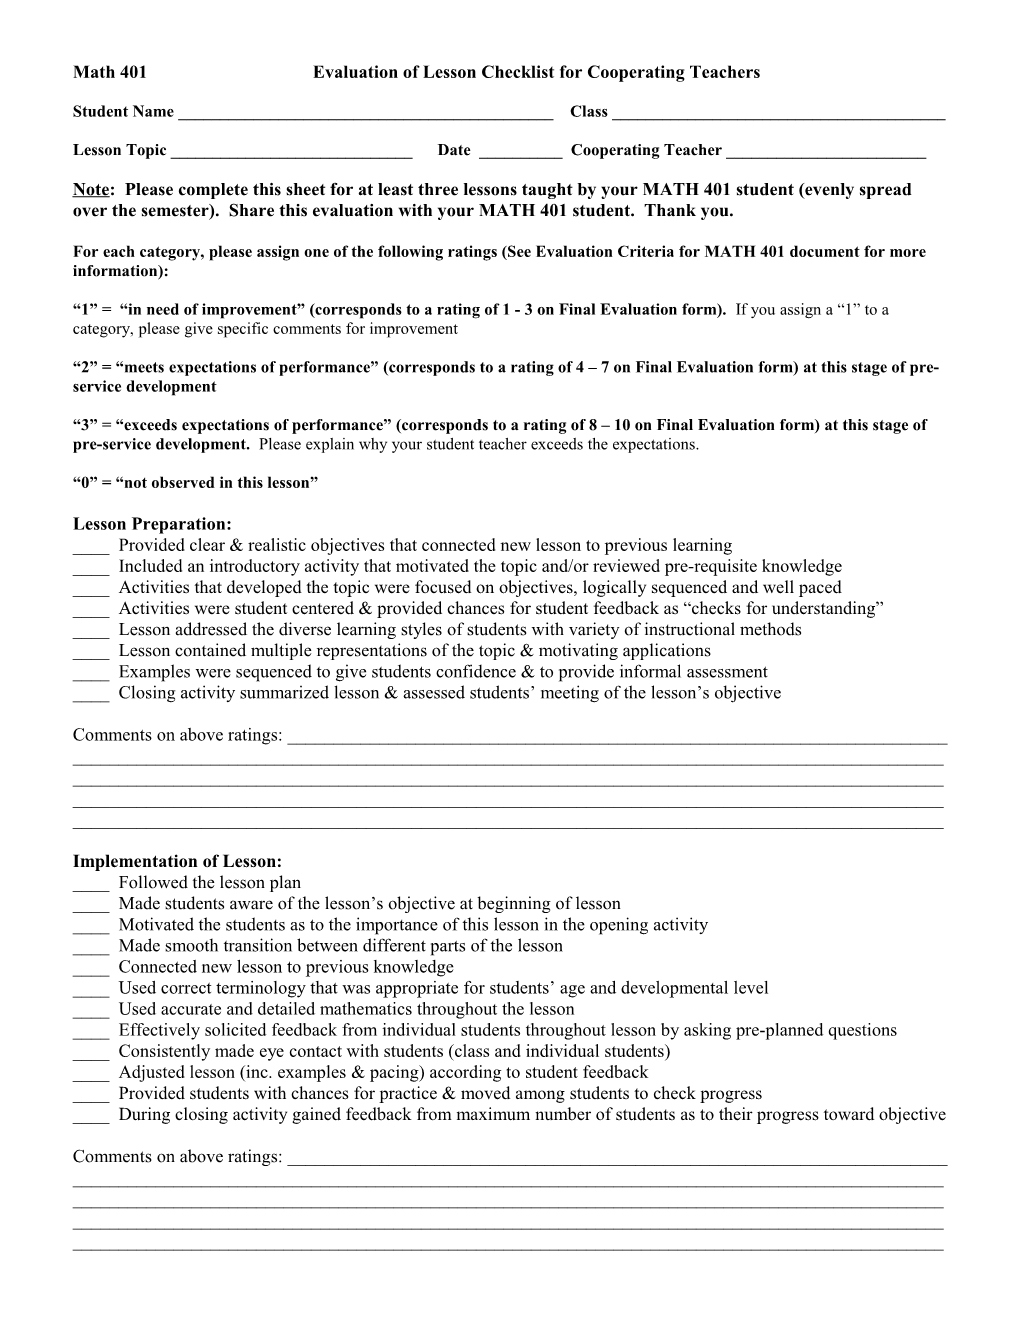 Math 401Evaluation of Lesson Checklist for Cooperating Teachers